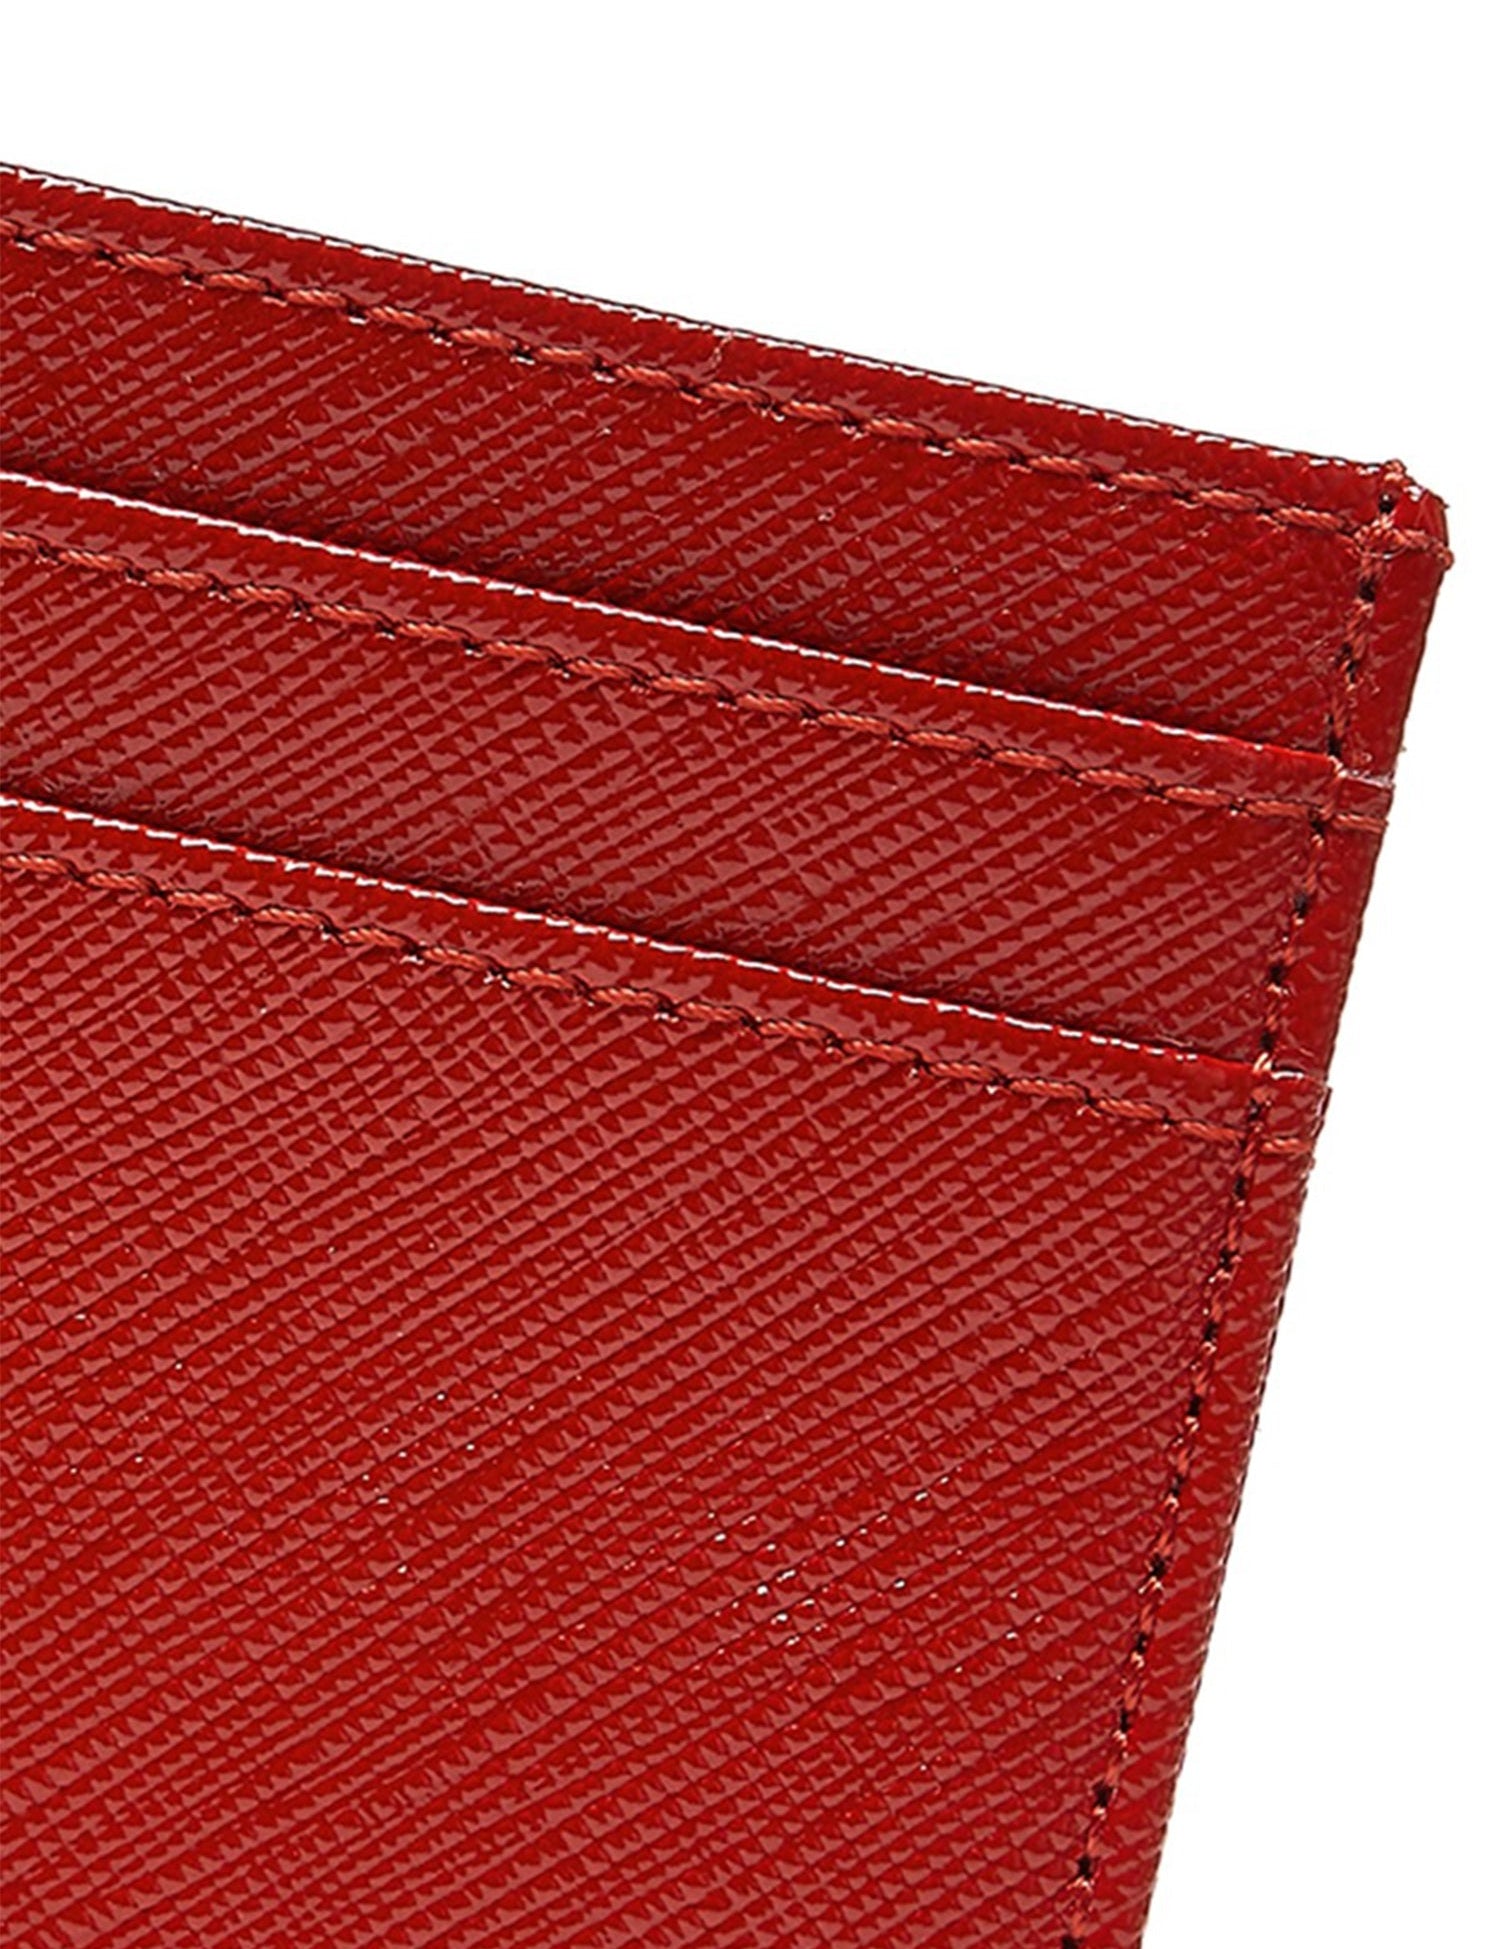 photo_template.psd_0013__0010_cardcase_red_detail.jpg